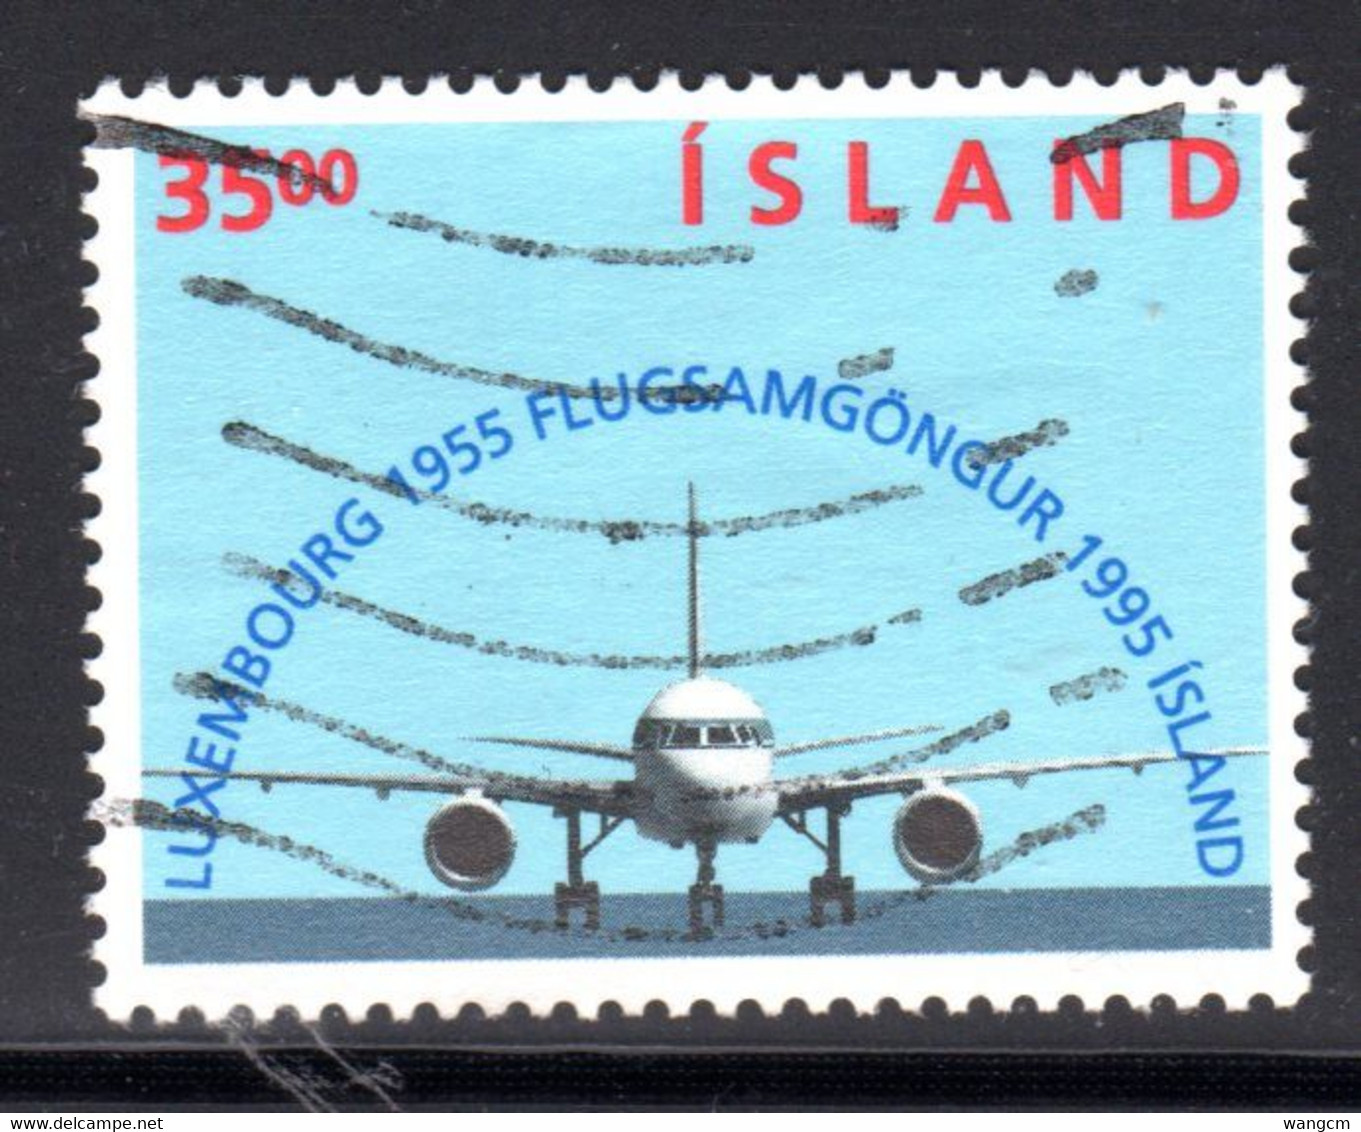 Iceland 1995 35k Iceland - Luxembourg Air Link Fine Used - Usados